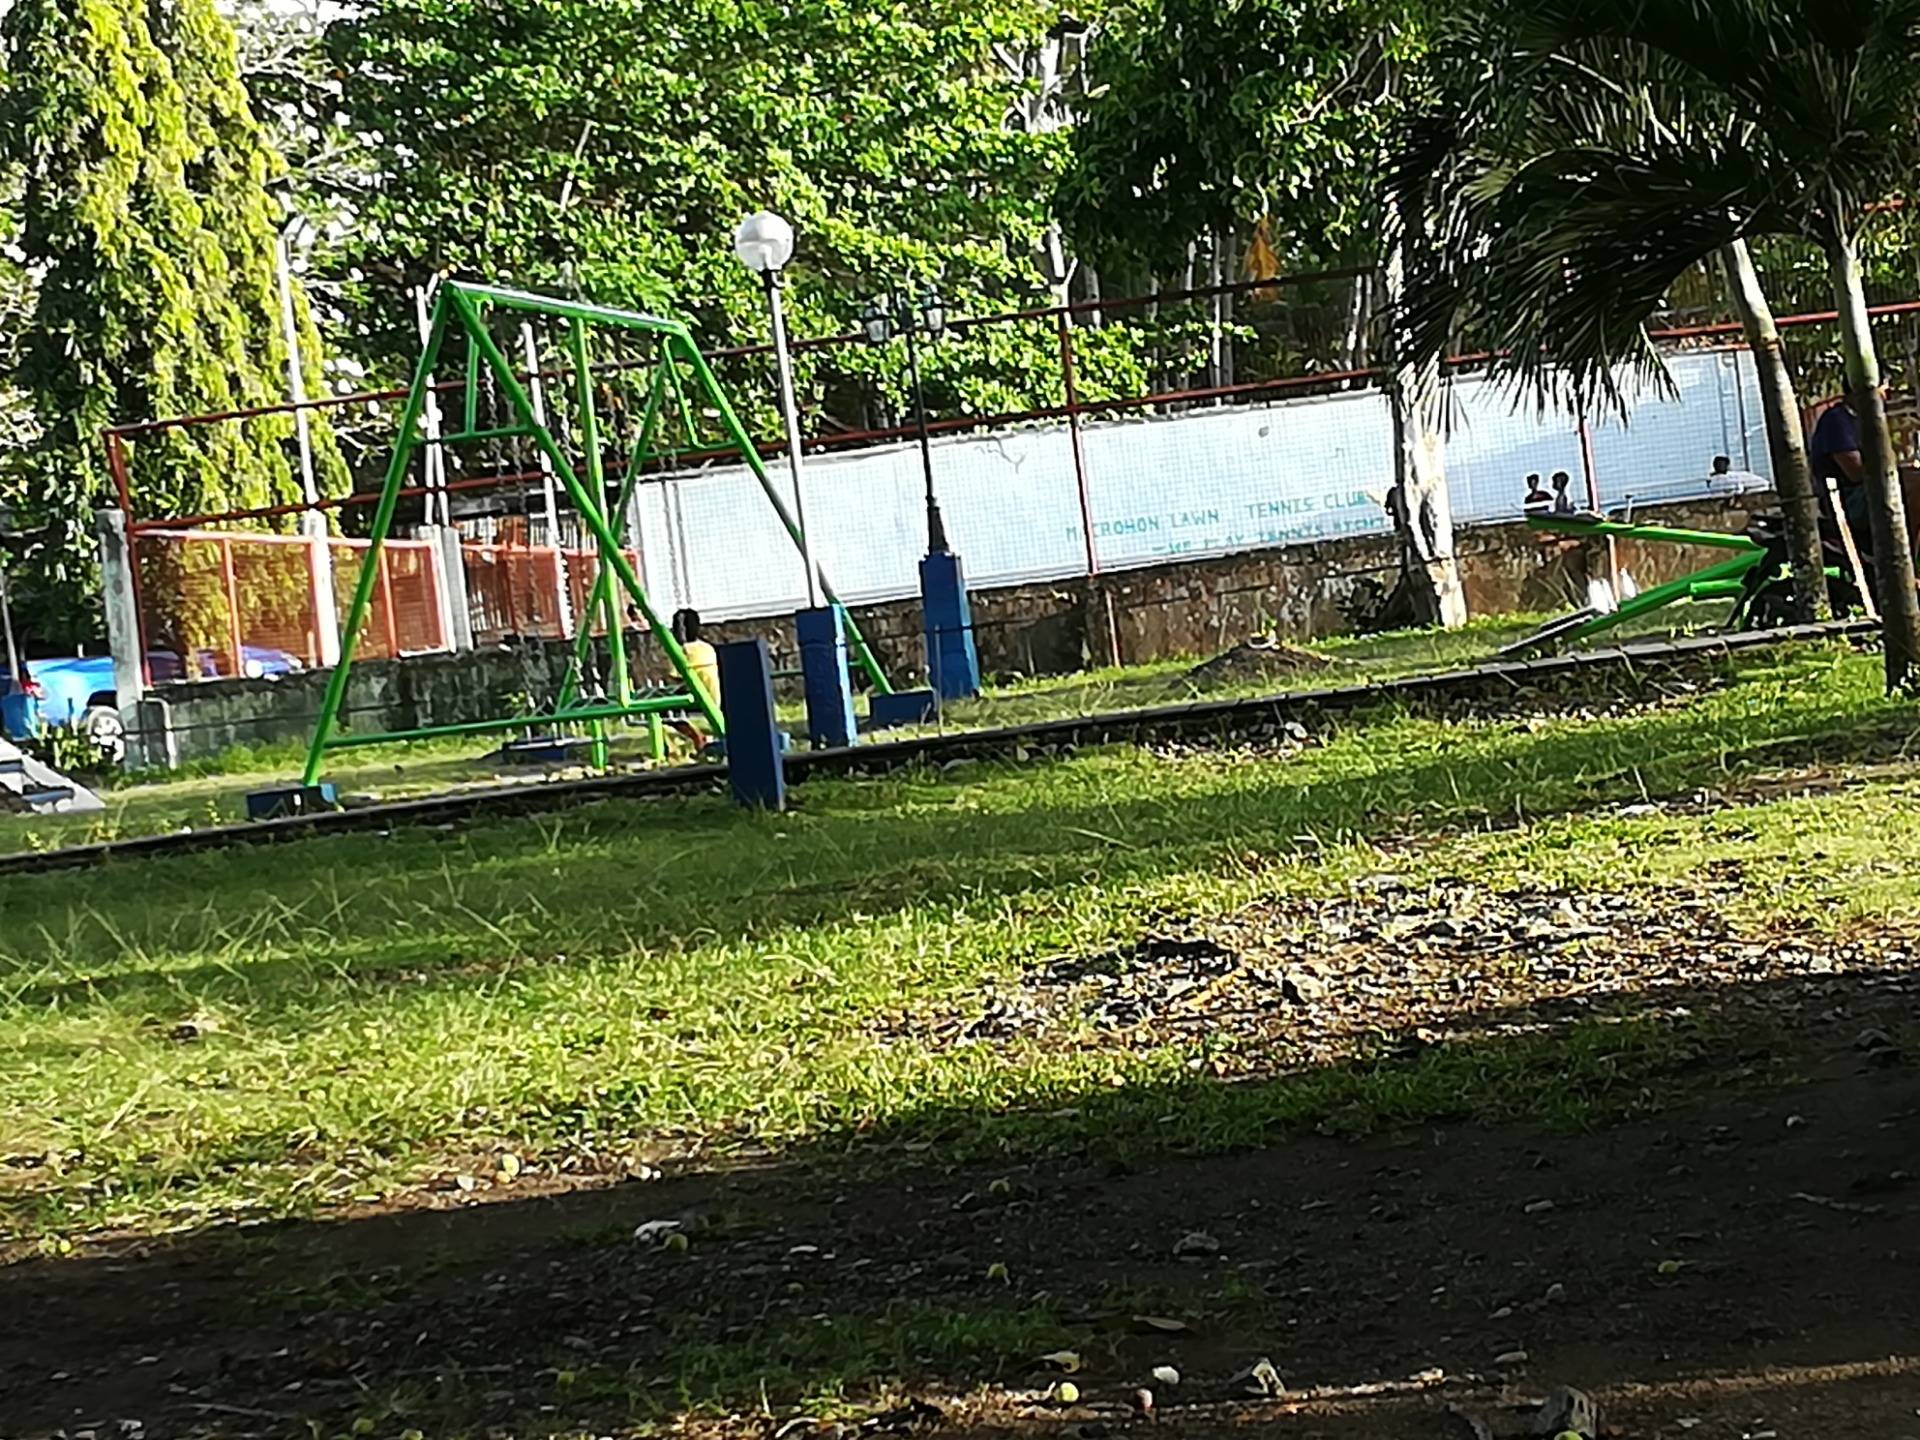 playground of the park and tennis court